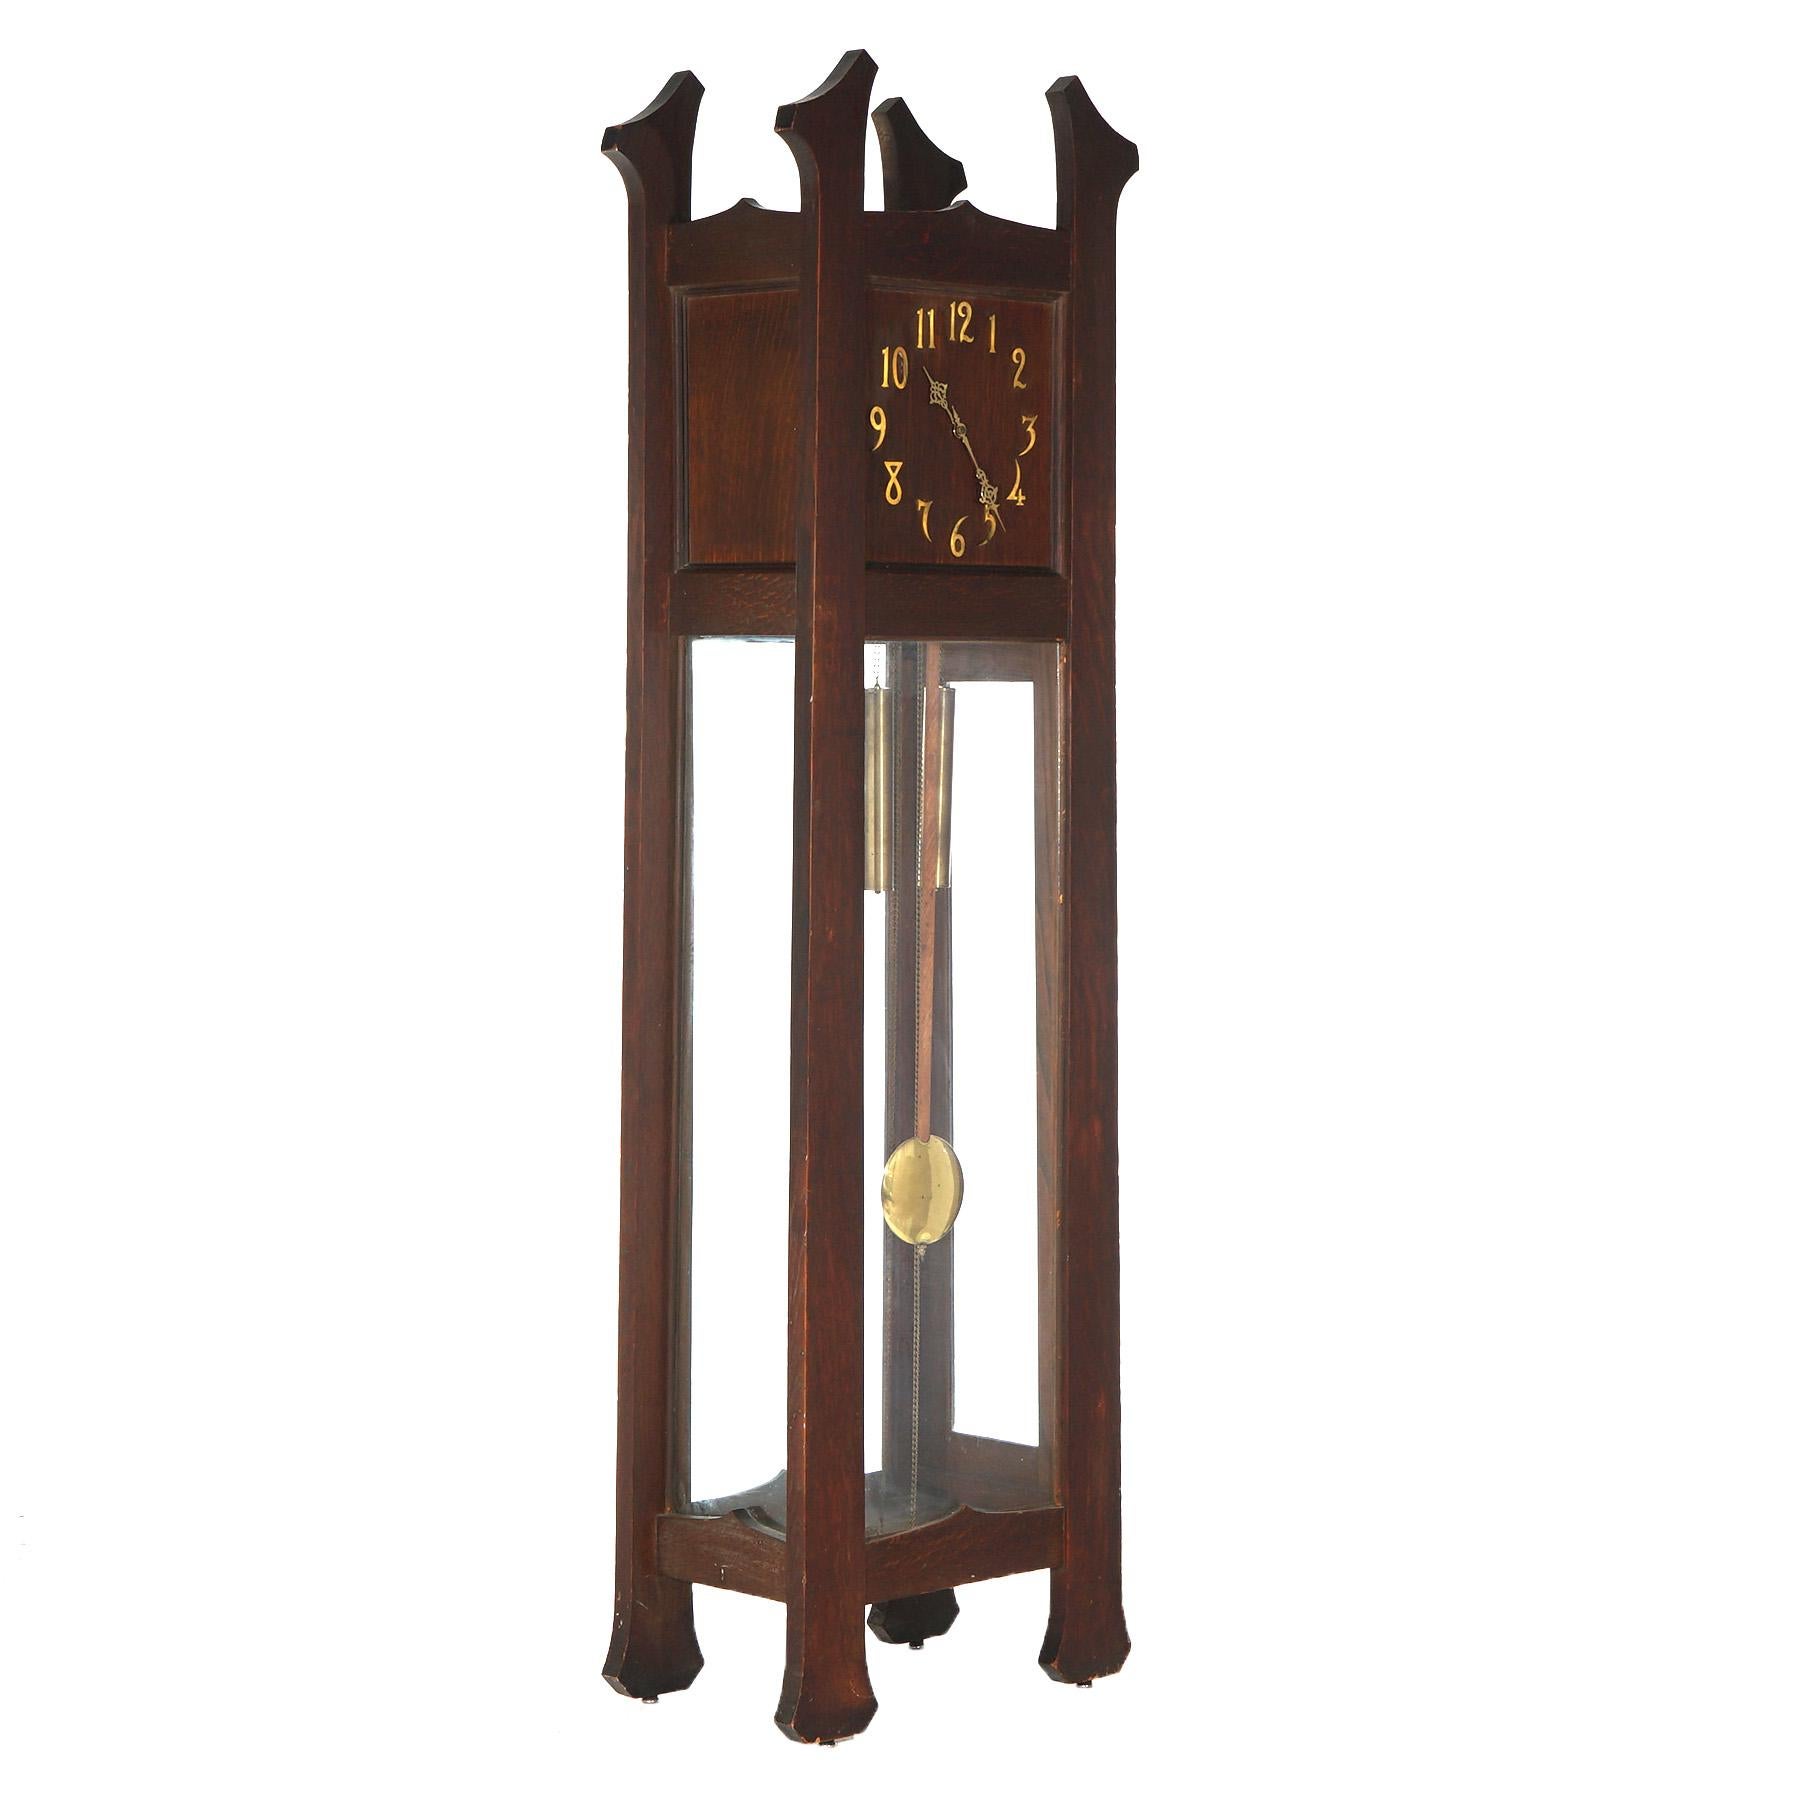 ***Ask About Reduced In-House Shipping Rates - Reliable Service & Fully Insured***
Antique Arts & Crafts Mission Stickley School Oak Open Escapement Grandfather Clock with Stylized Feet, C1910

Measures - 80.75